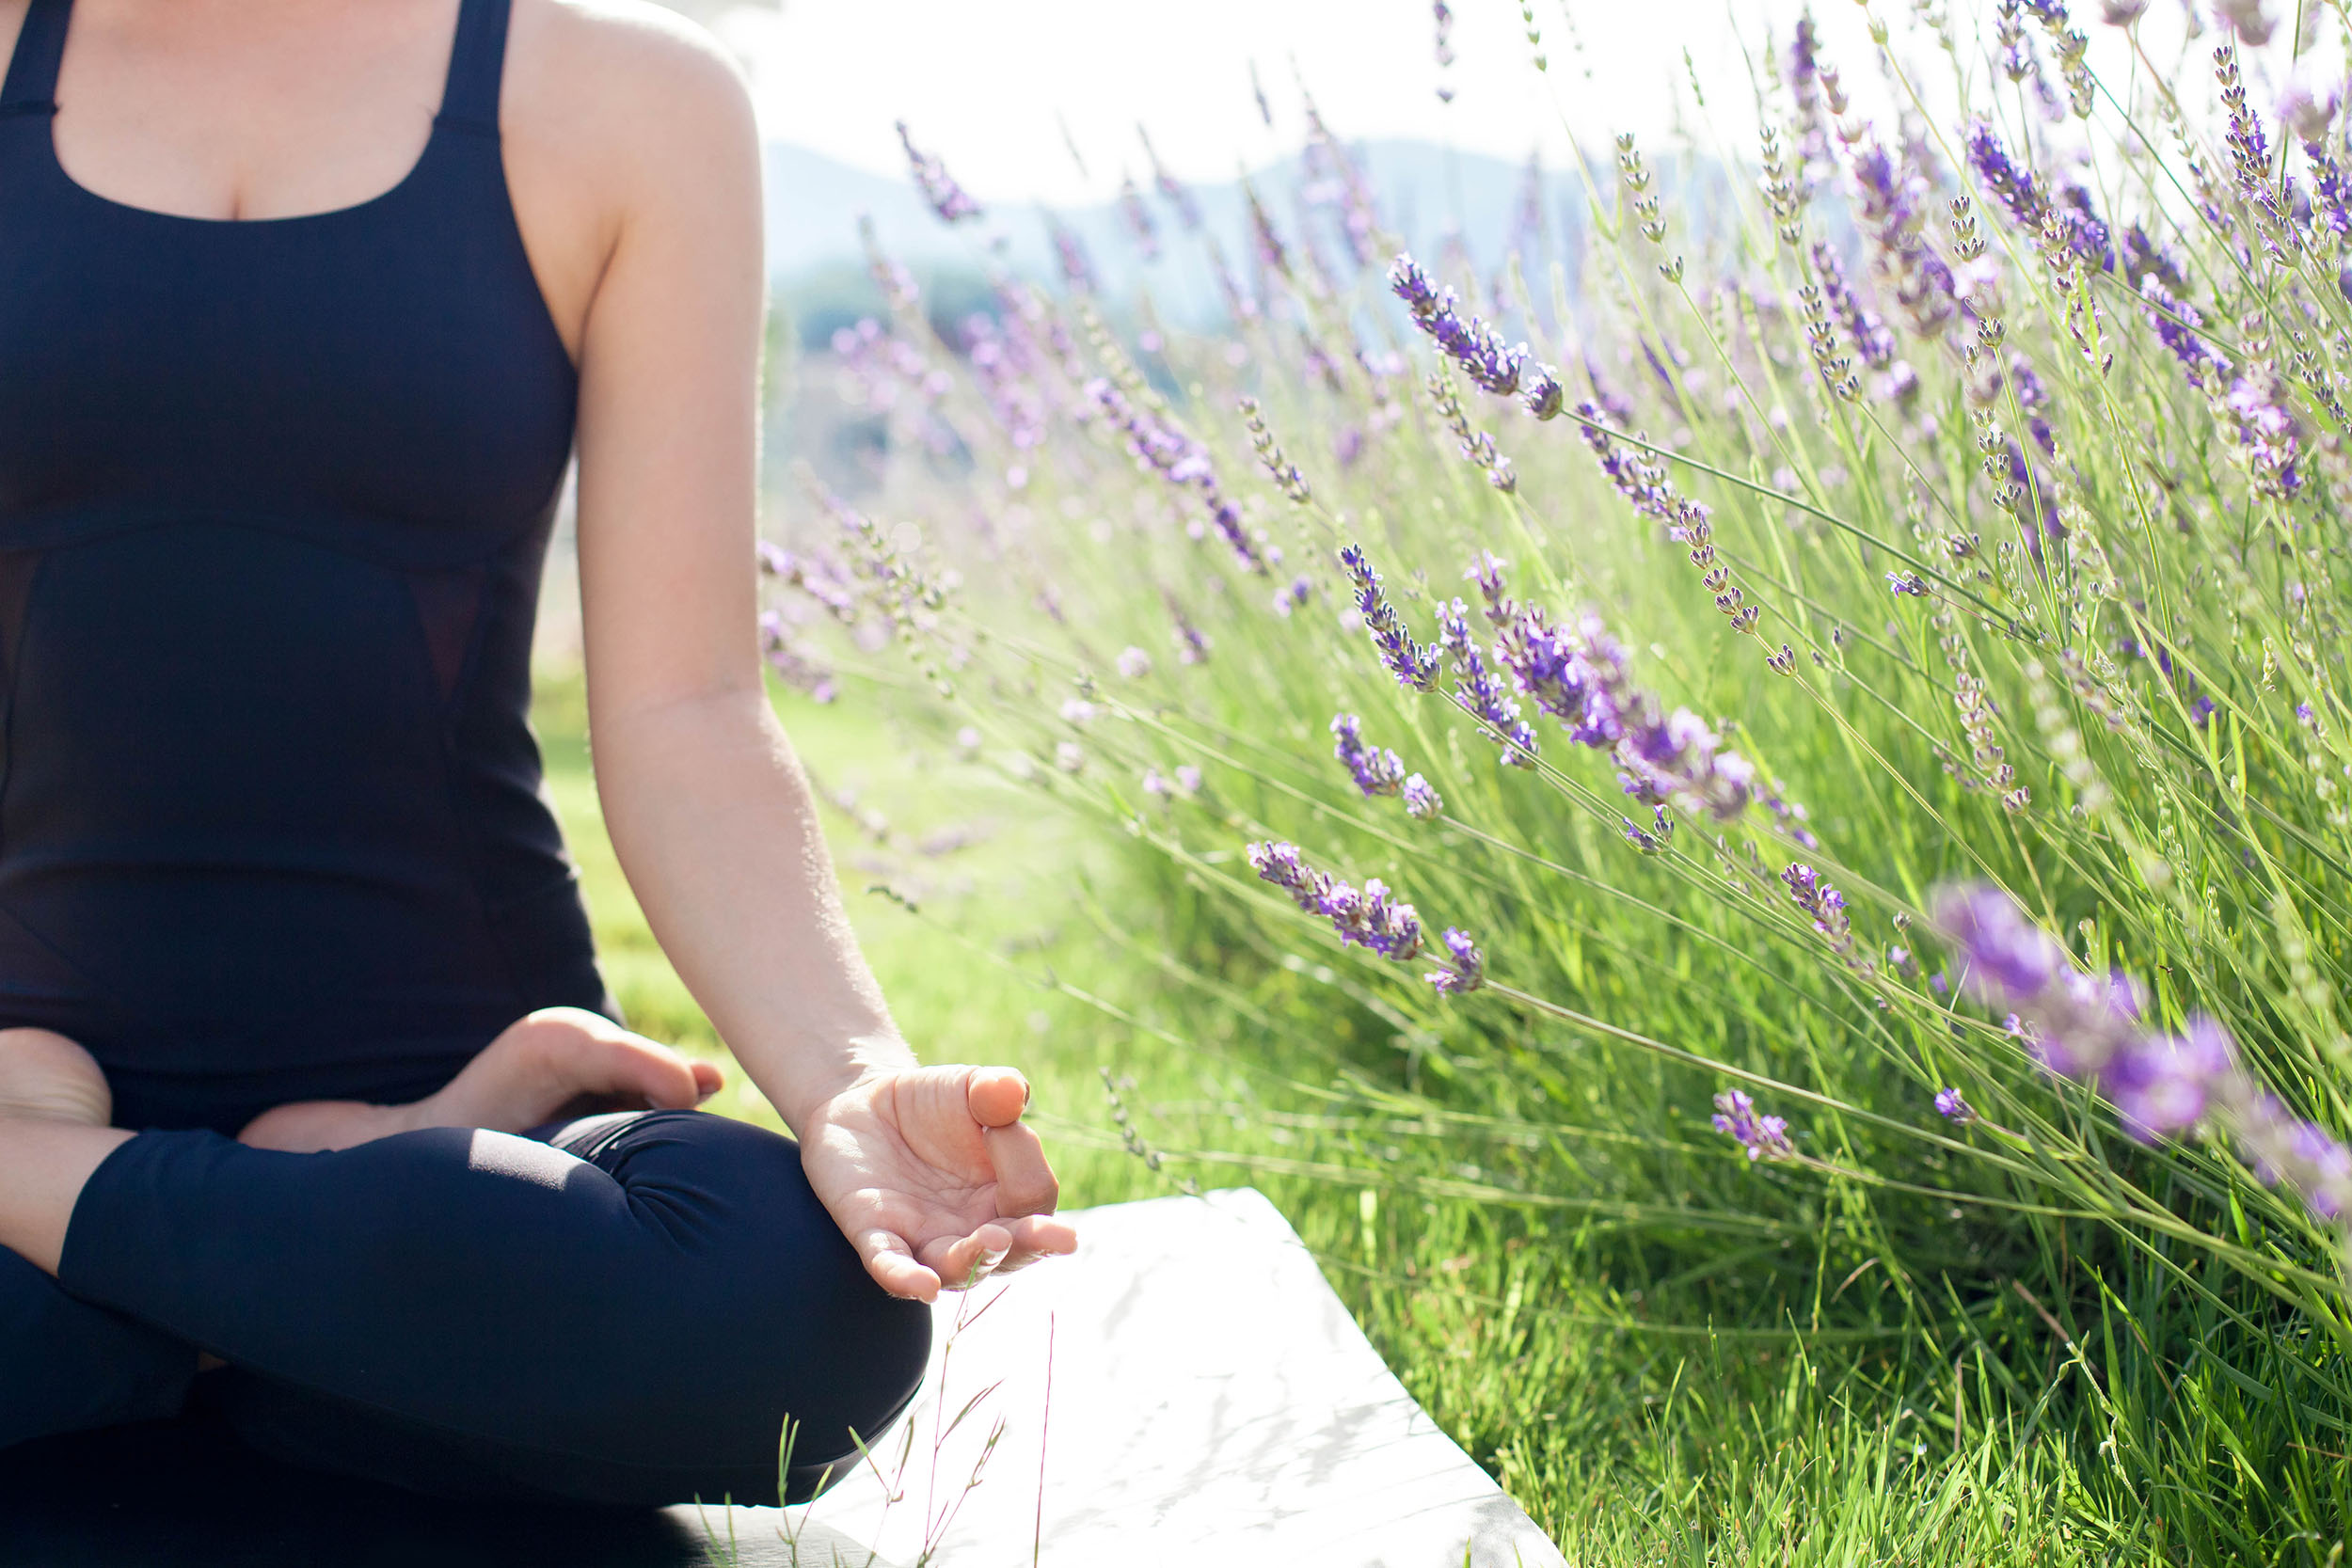 Woman is practicing yoga in lavender field. Showcasing the Blossom & Balance Experience